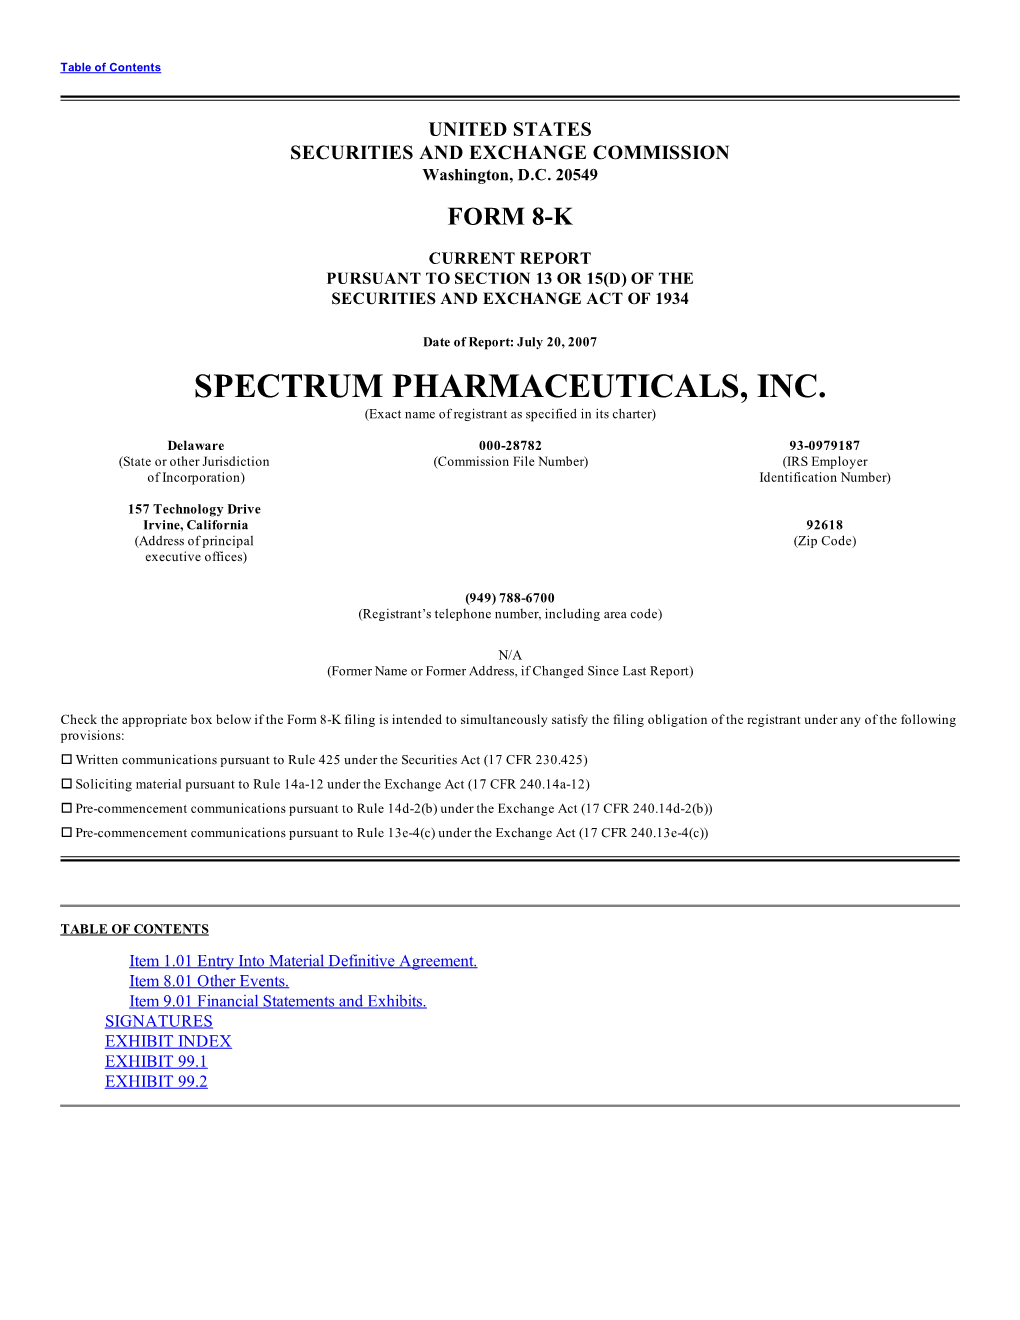 SPECTRUM PHARMACEUTICALS, INC. (Exact Name of Registrant As Specified in Its Charter)